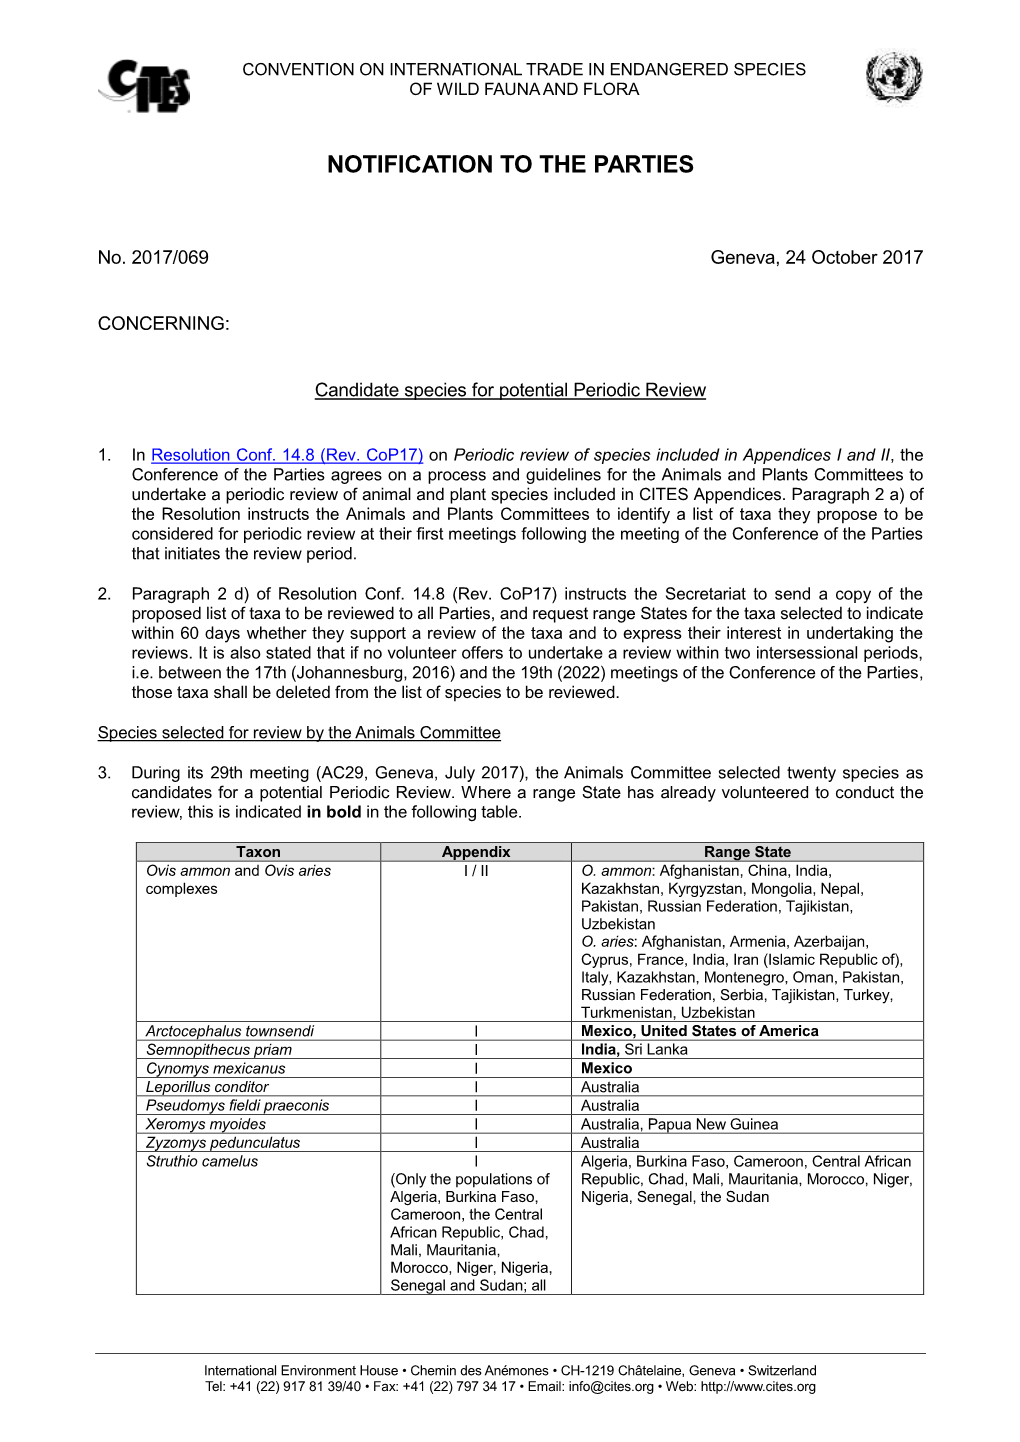 Notification to the Parties No. 2017